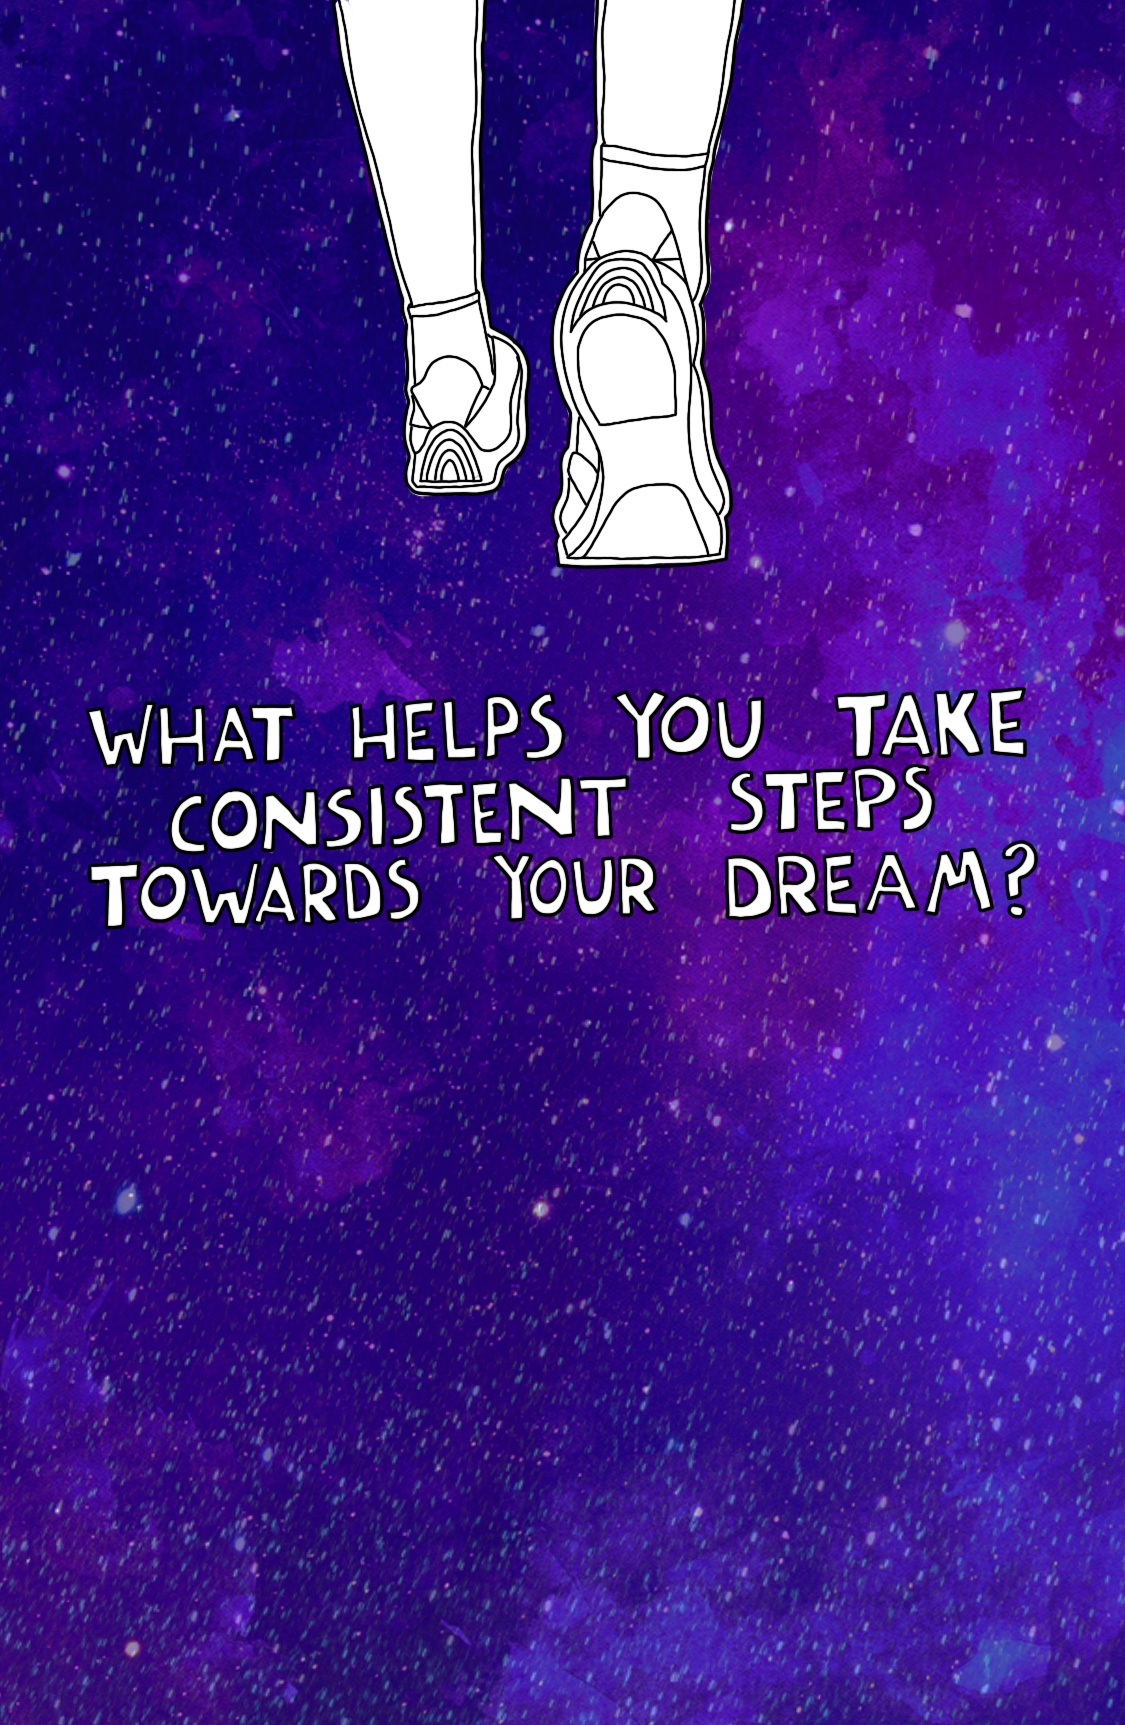 Journal Prompt: What helps you take consistent steps towards your dream?